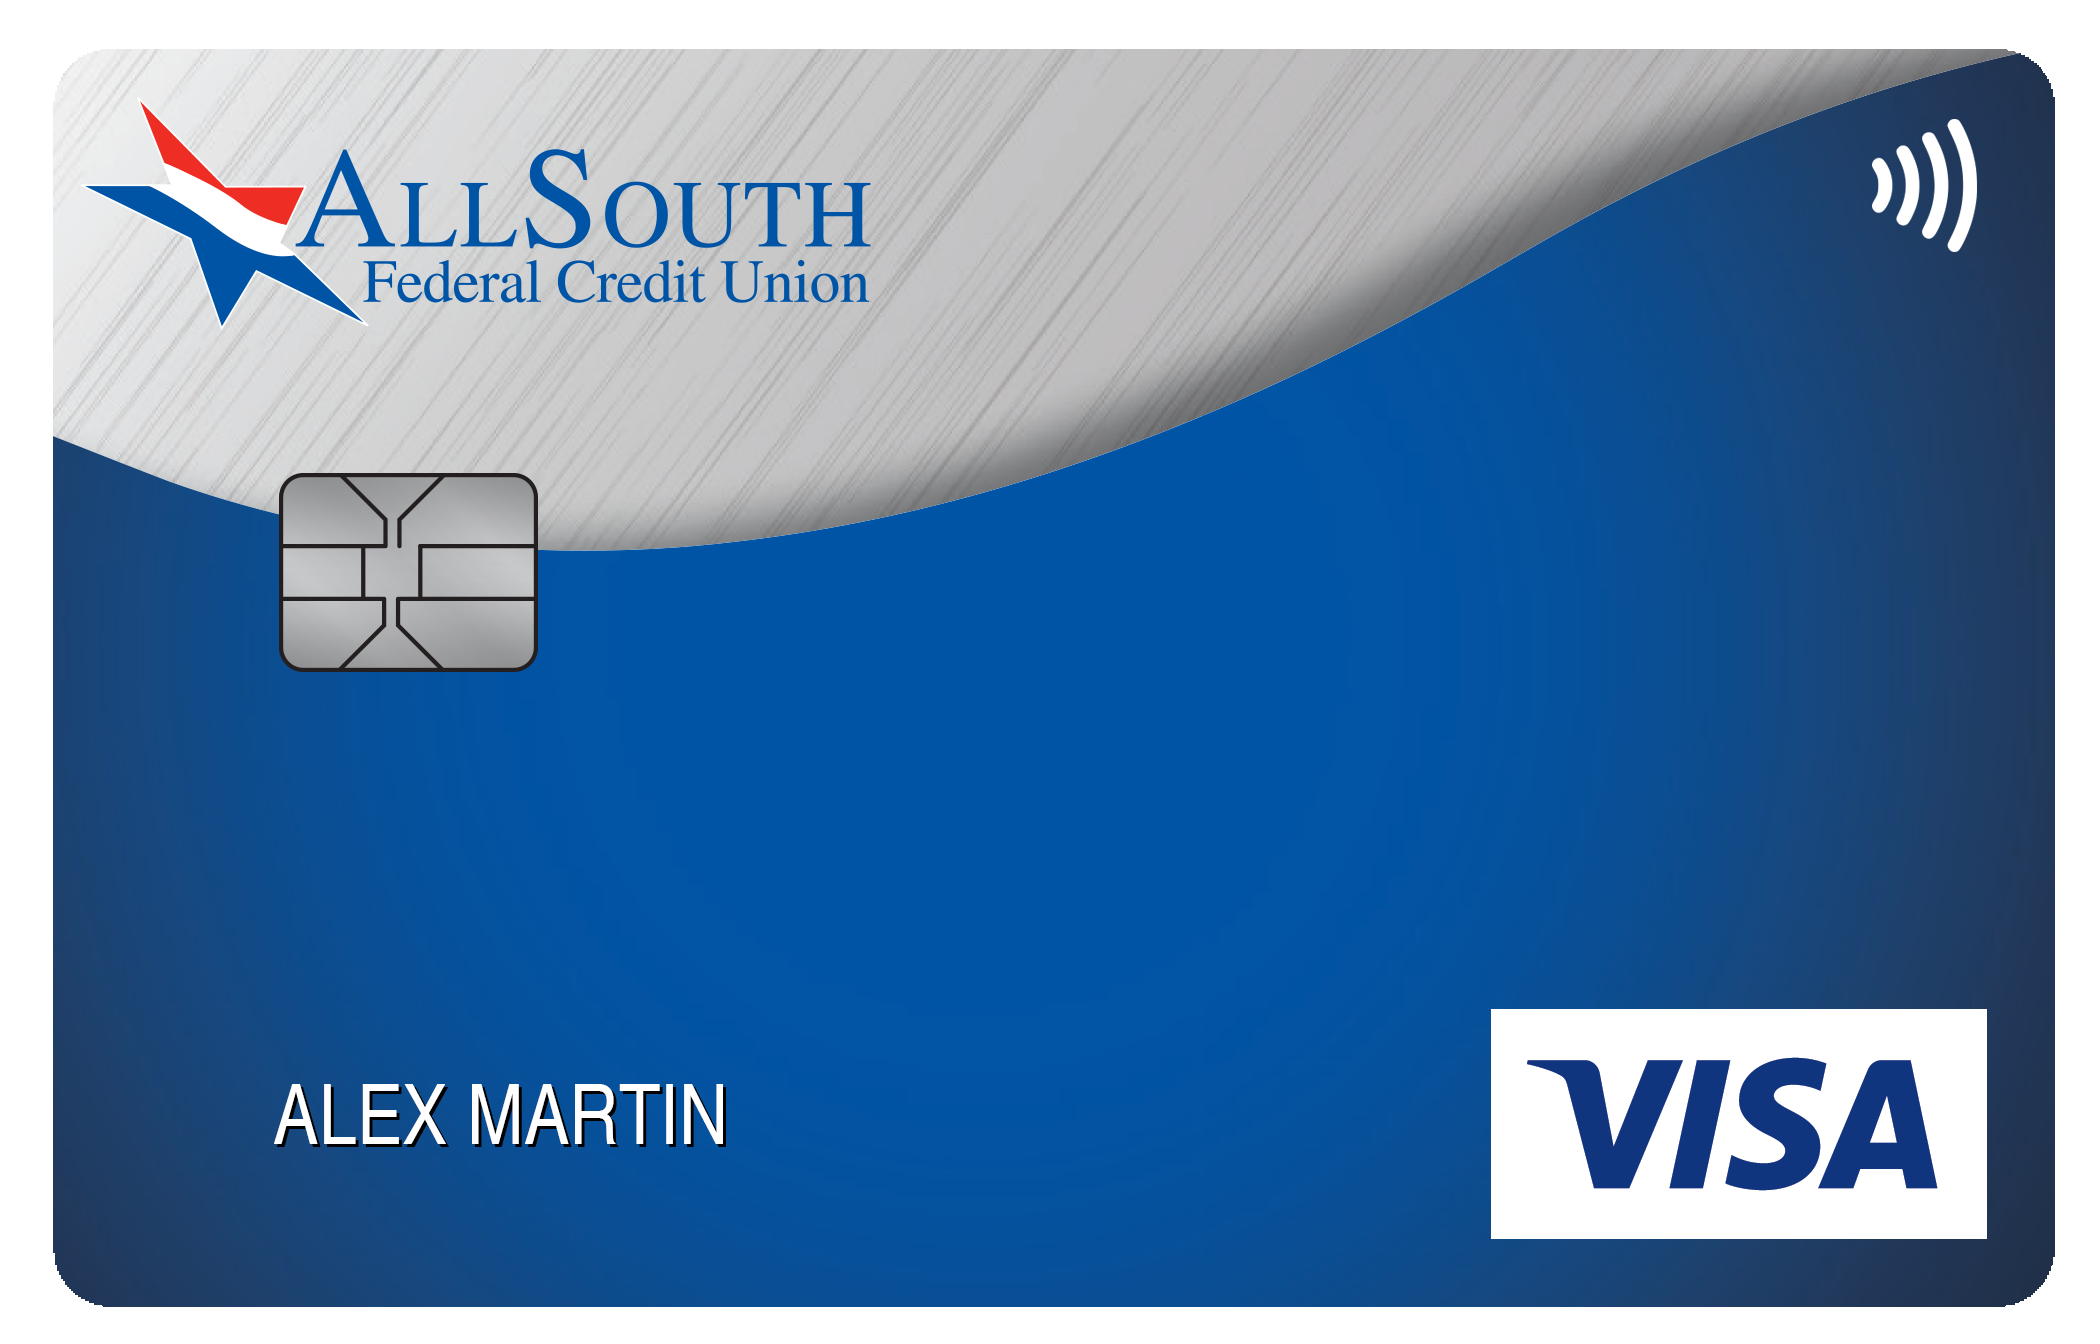 AllSouth Federal Credit Union Secured Card